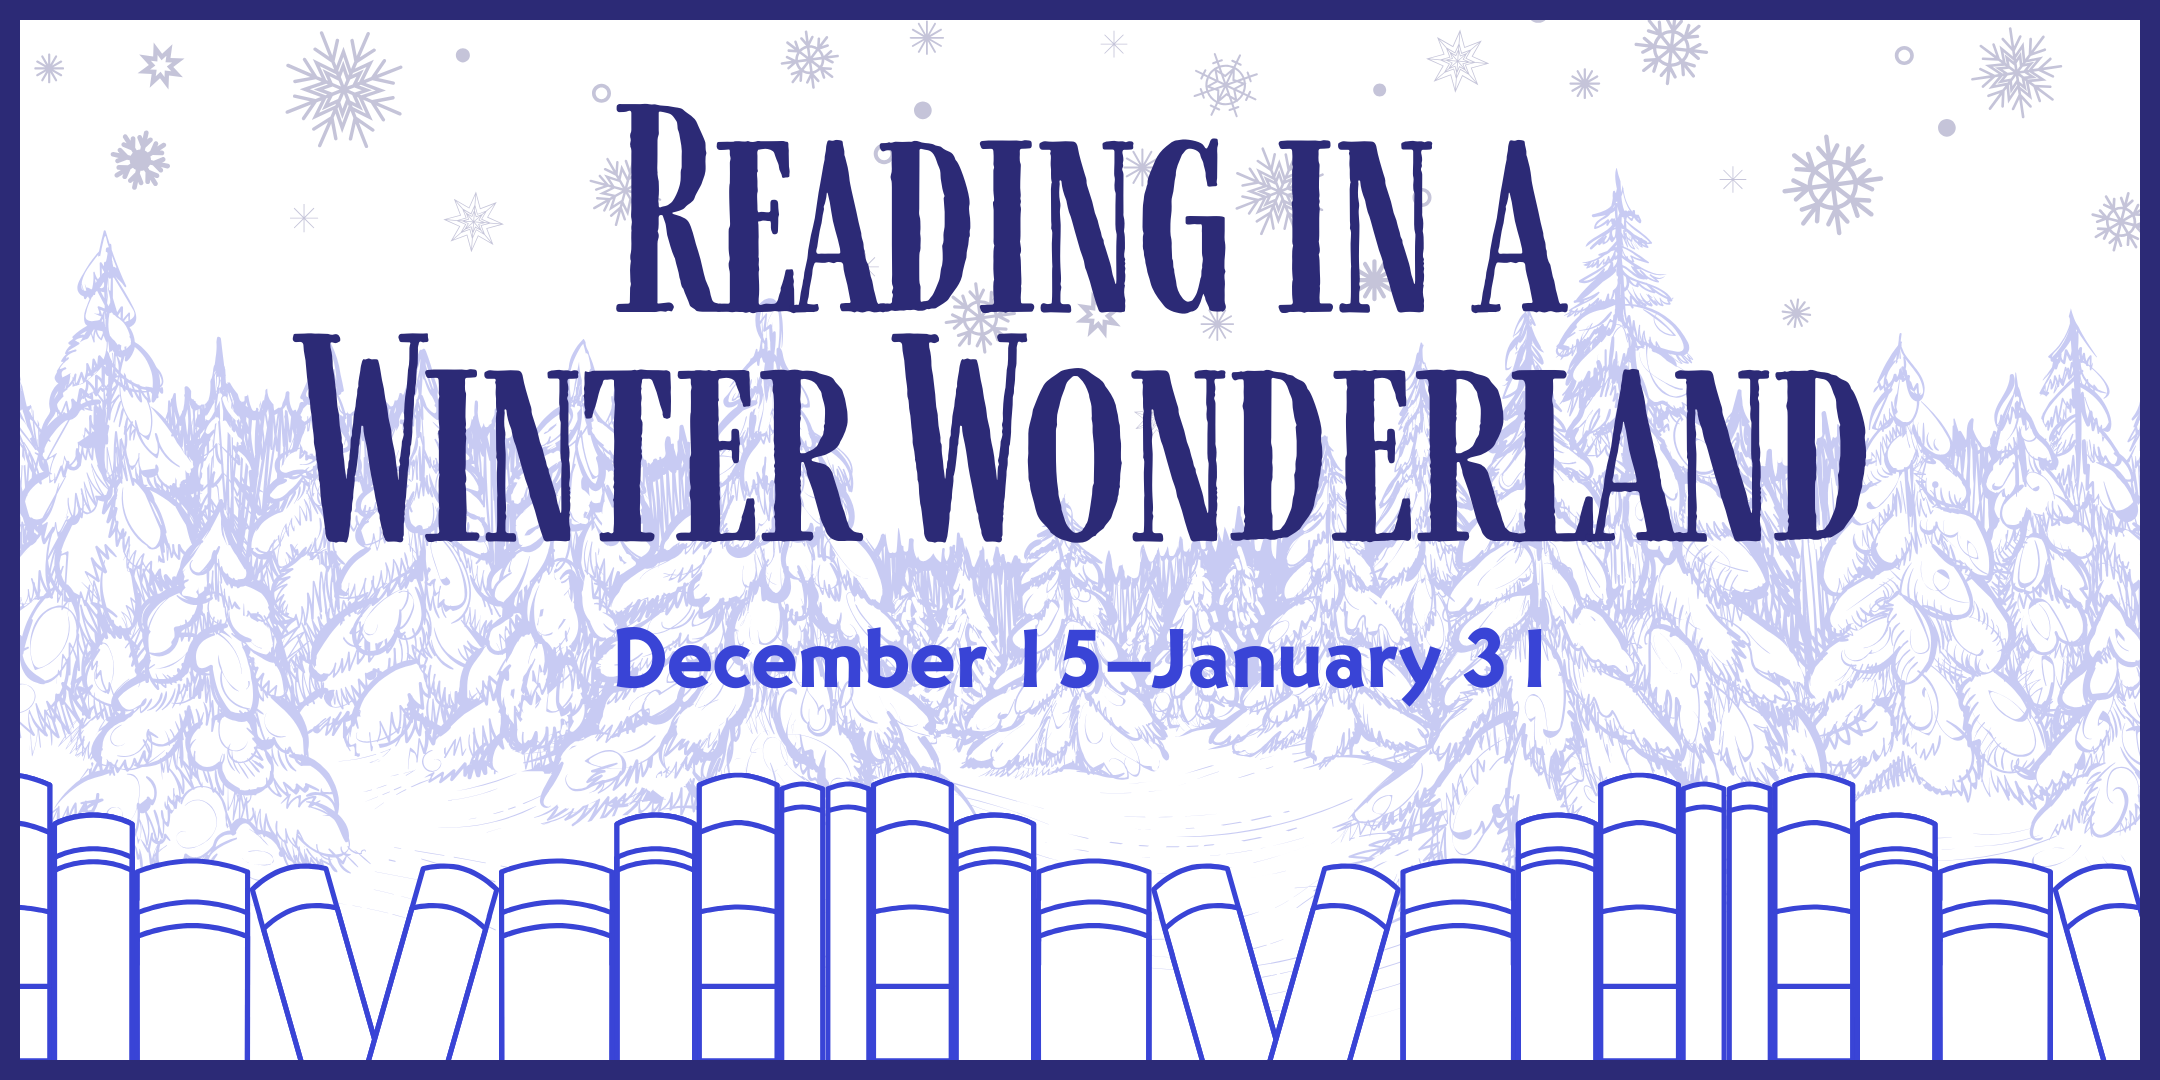 image of "Reading in a Winter Wonderland"